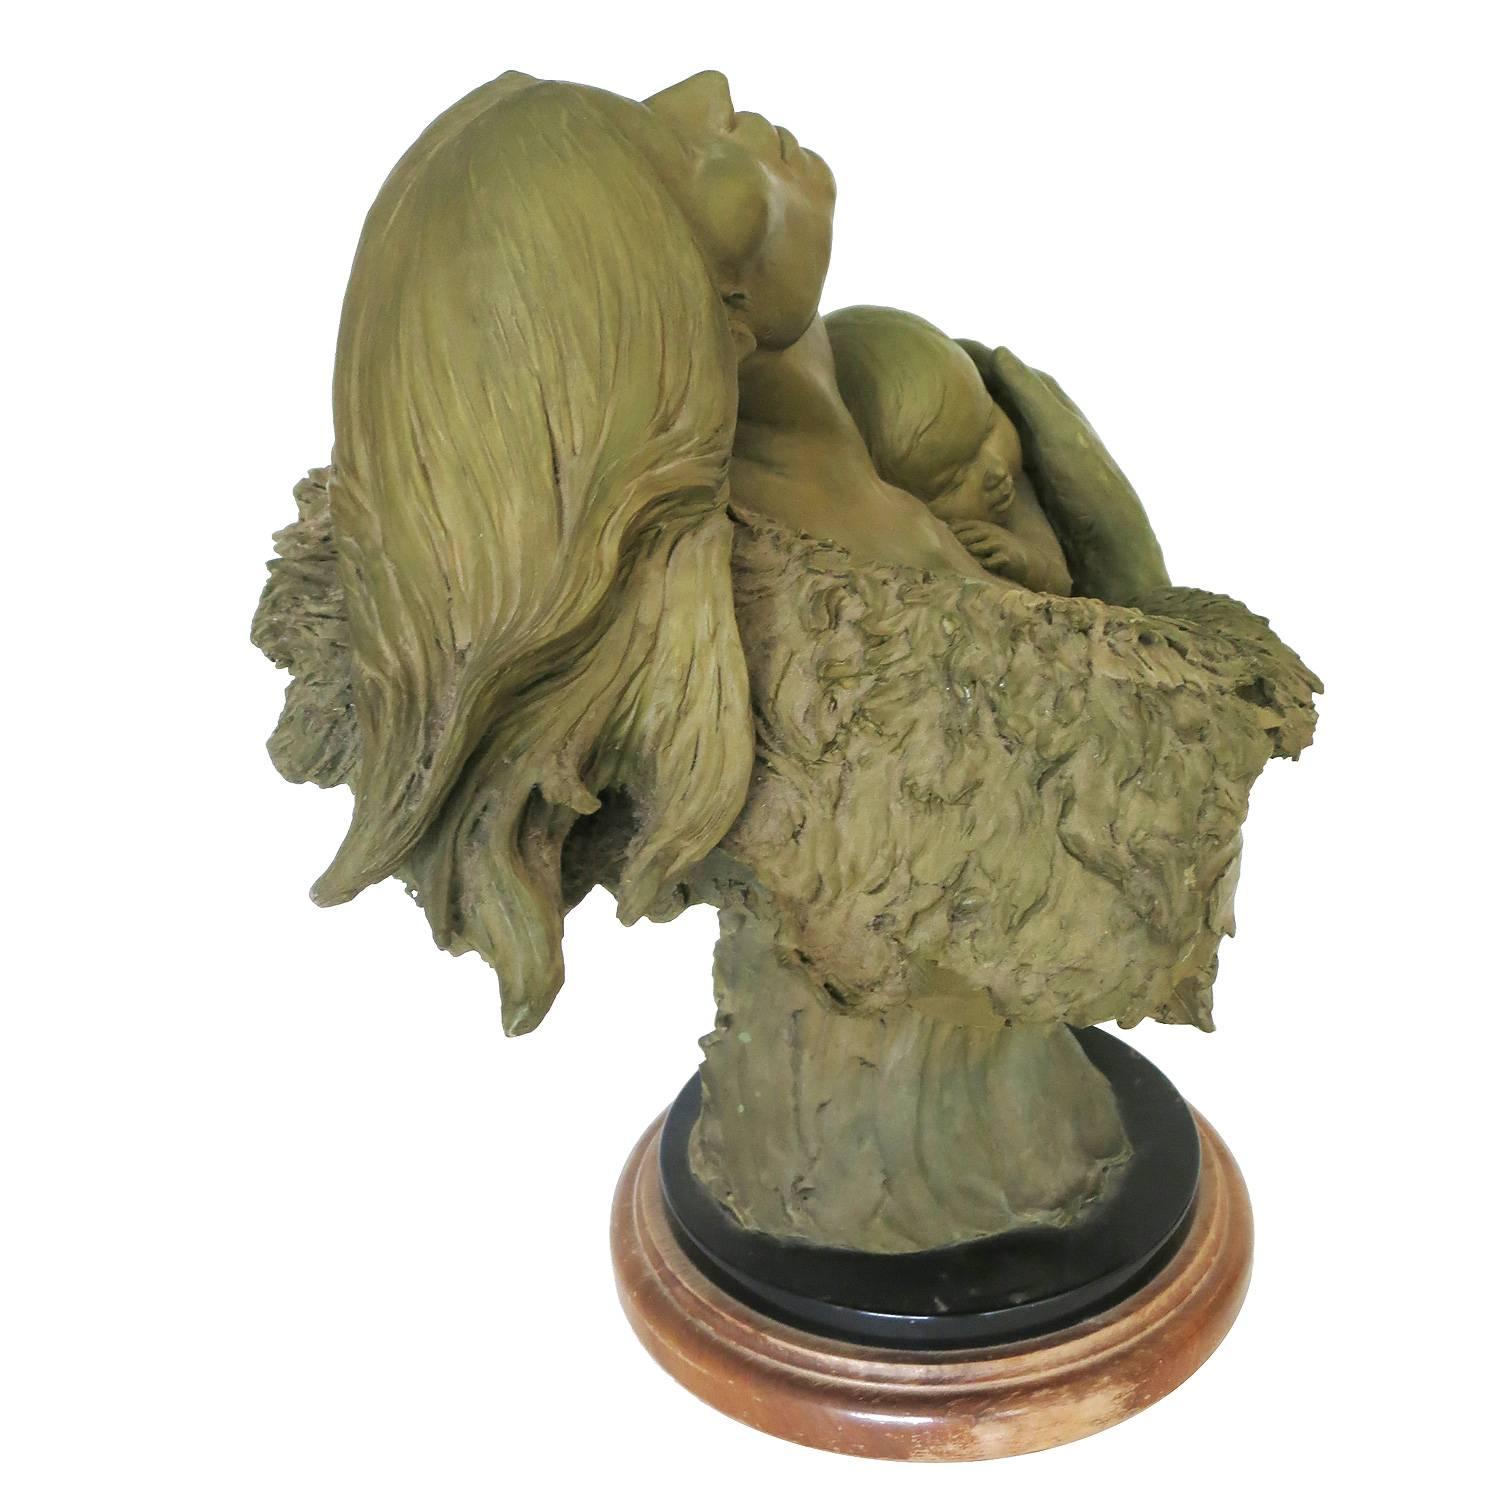 American Rare Mother and Child Sculpture Bust by Joe Slockbower for Mill Creek Studios For Sale